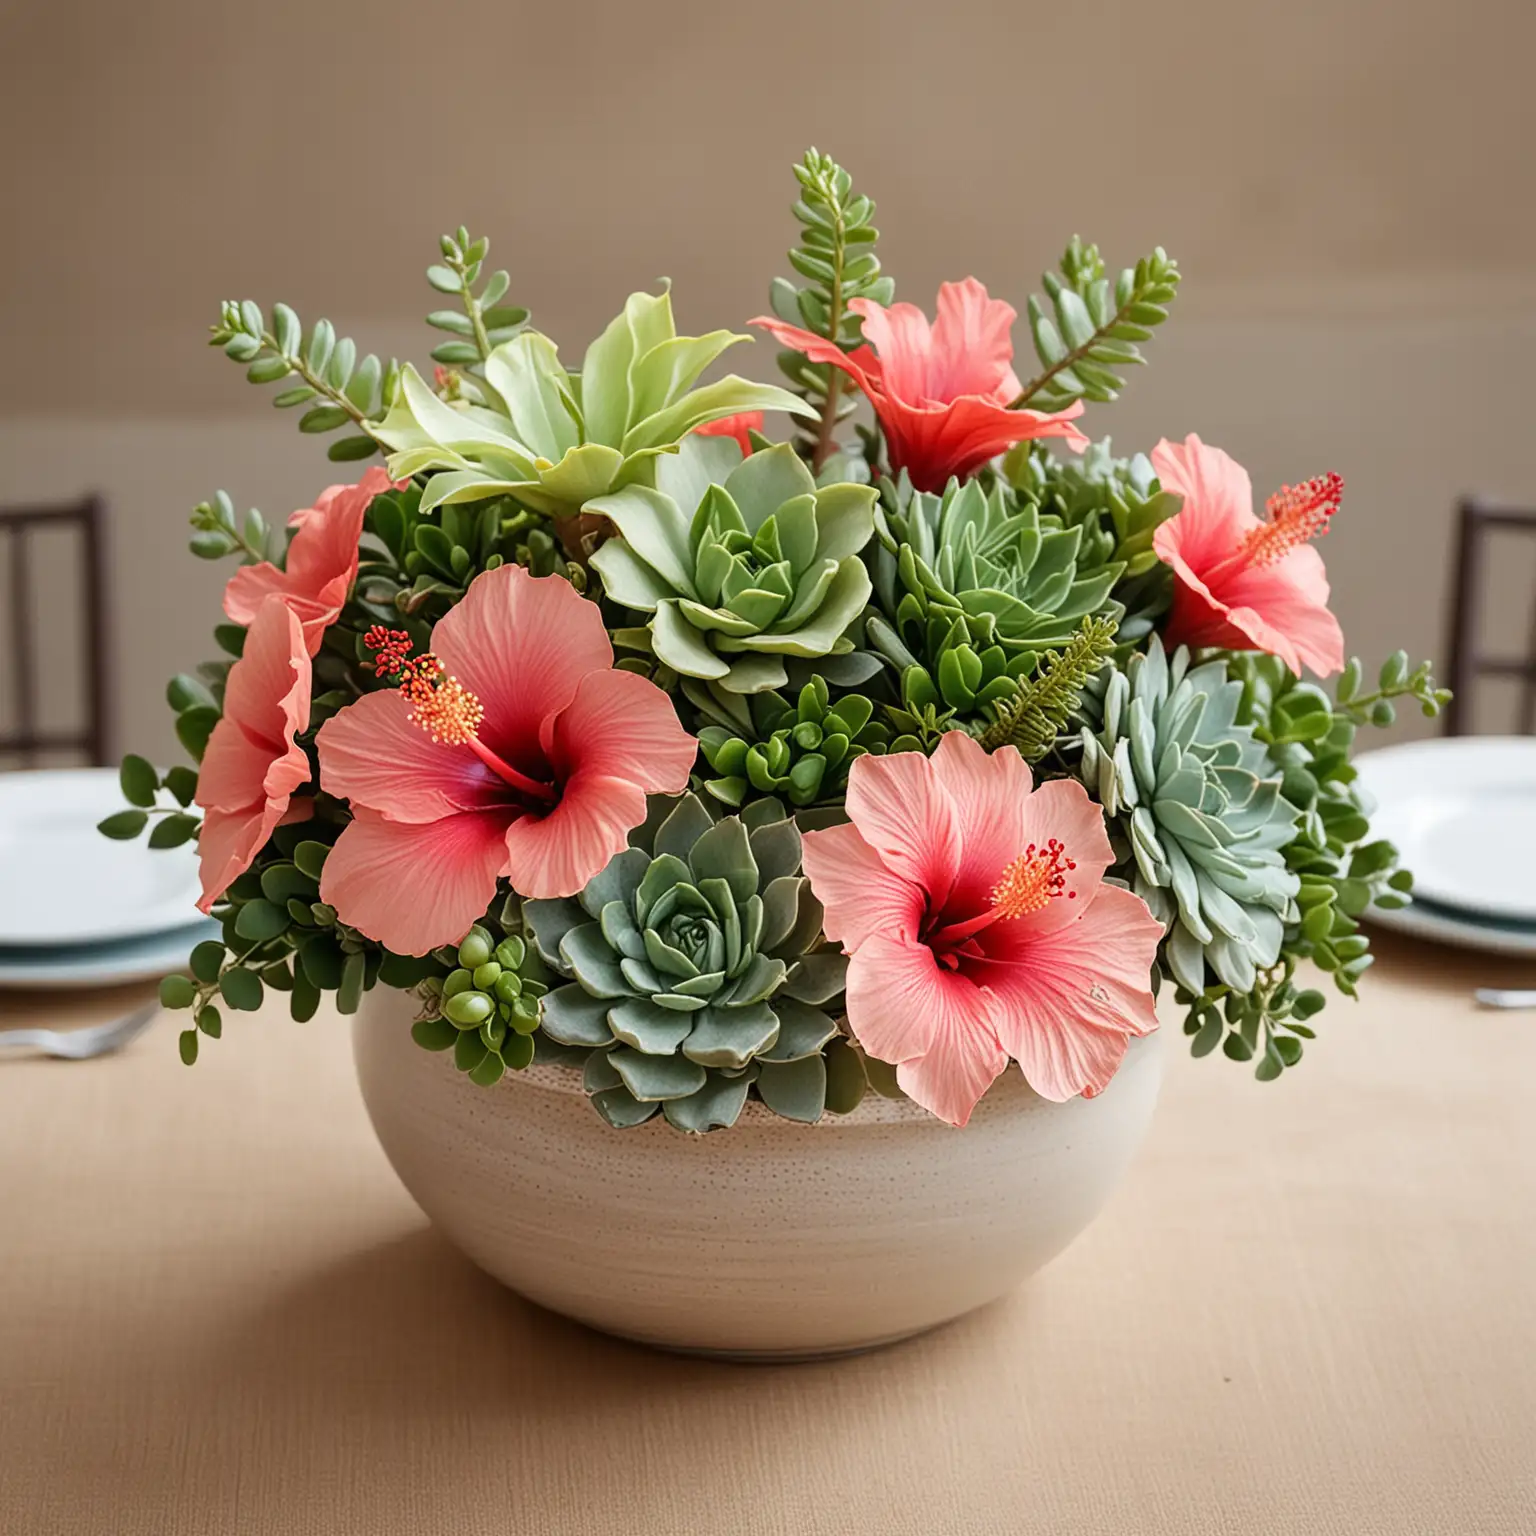 a wedding centerpiece with a round vase with succulents and hibiscus flower blossoms for a balanced look